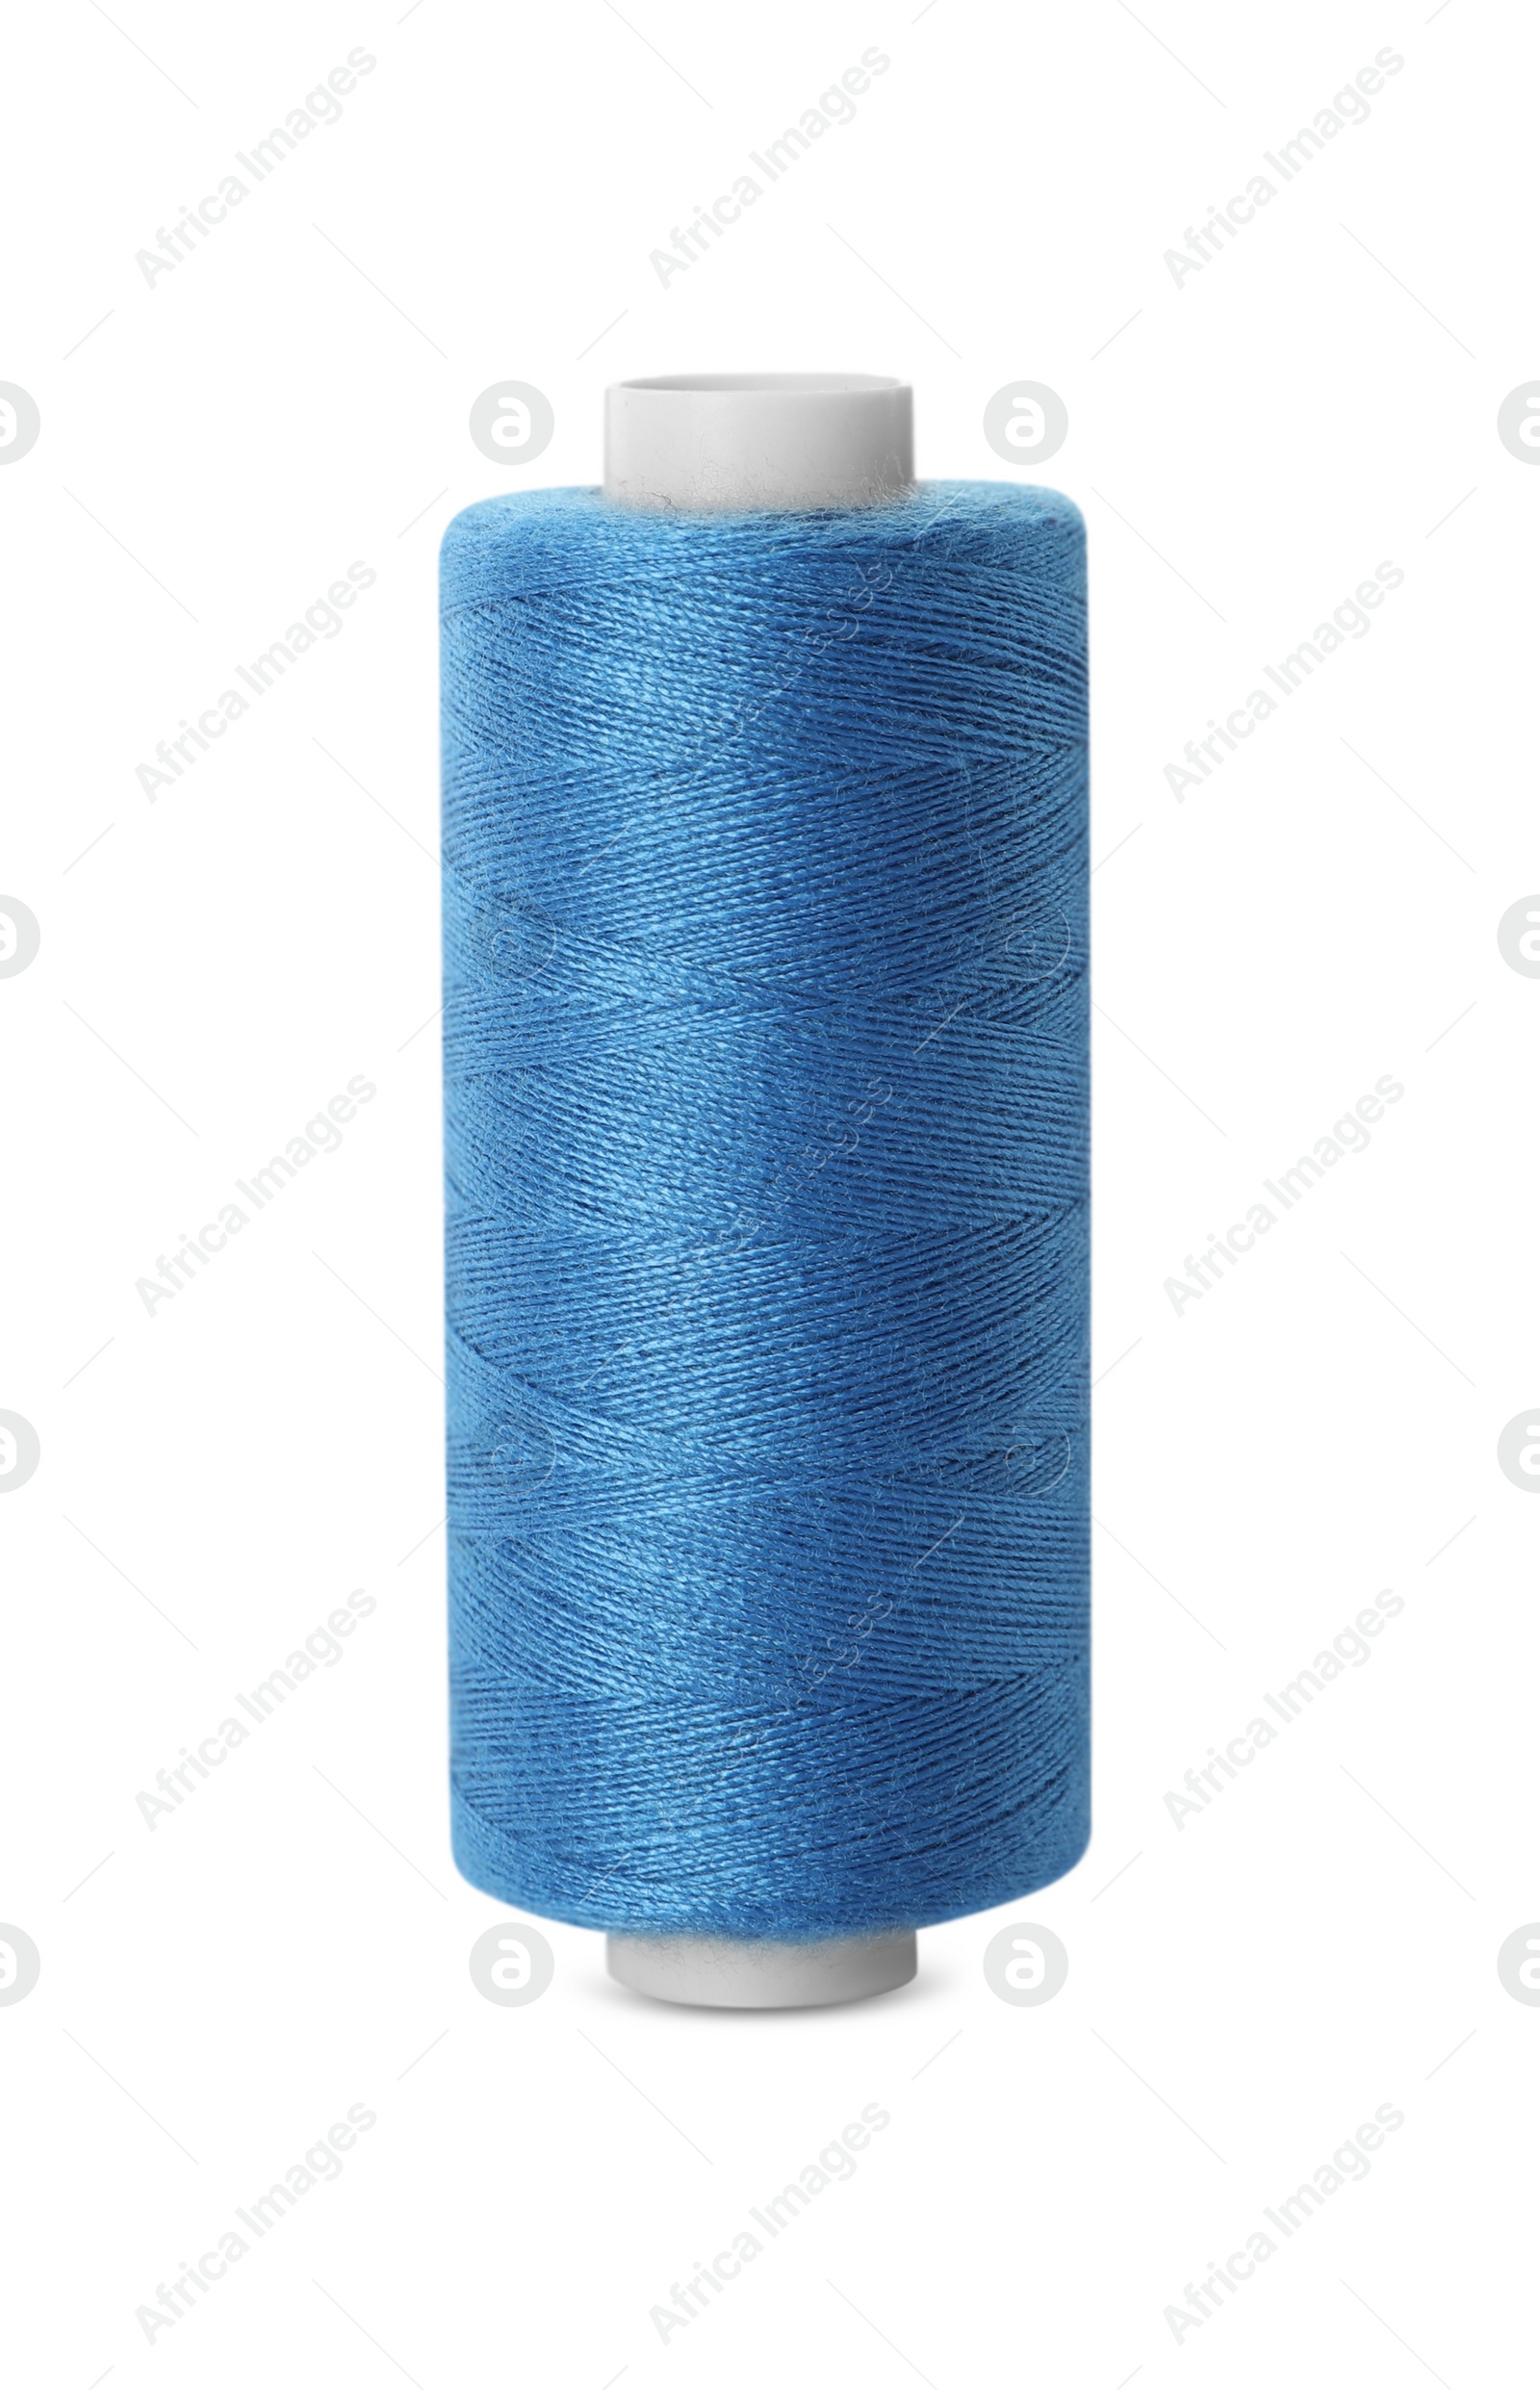 Photo of Spool of blue sewing thread isolated on white